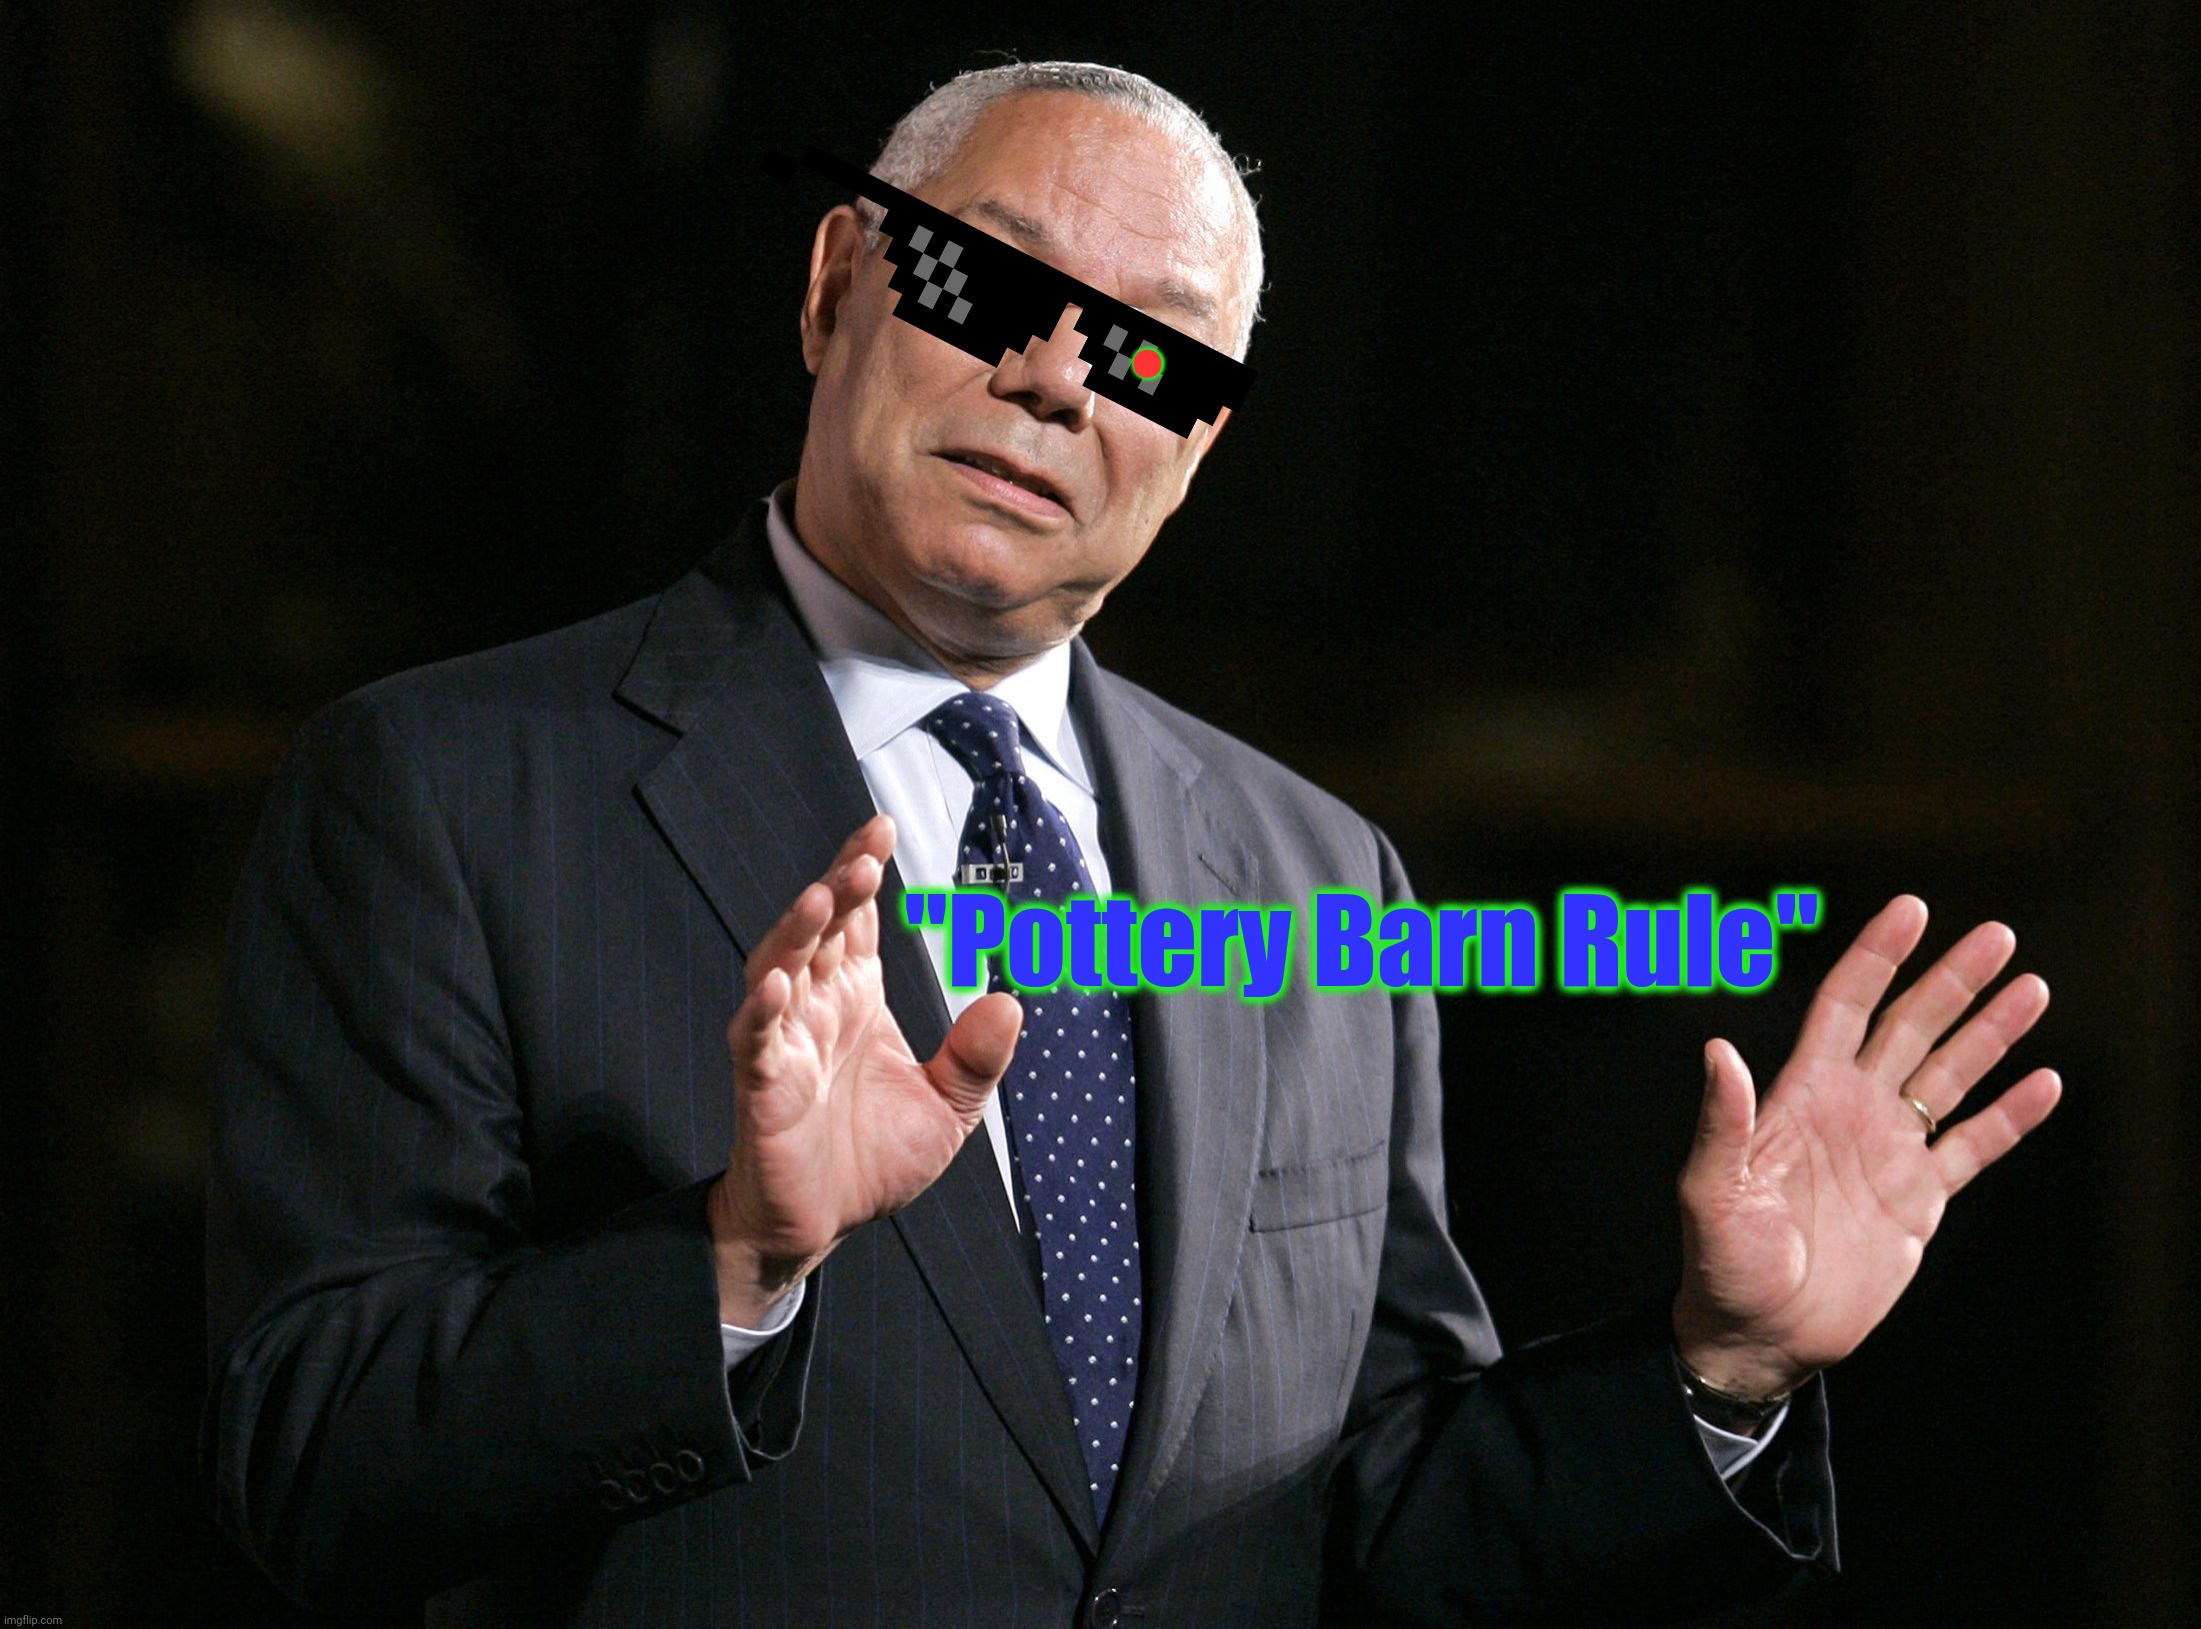 Colin Powell1 | . "Pottery Barn Rule" | image tagged in colin powell1 | made w/ Imgflip meme maker